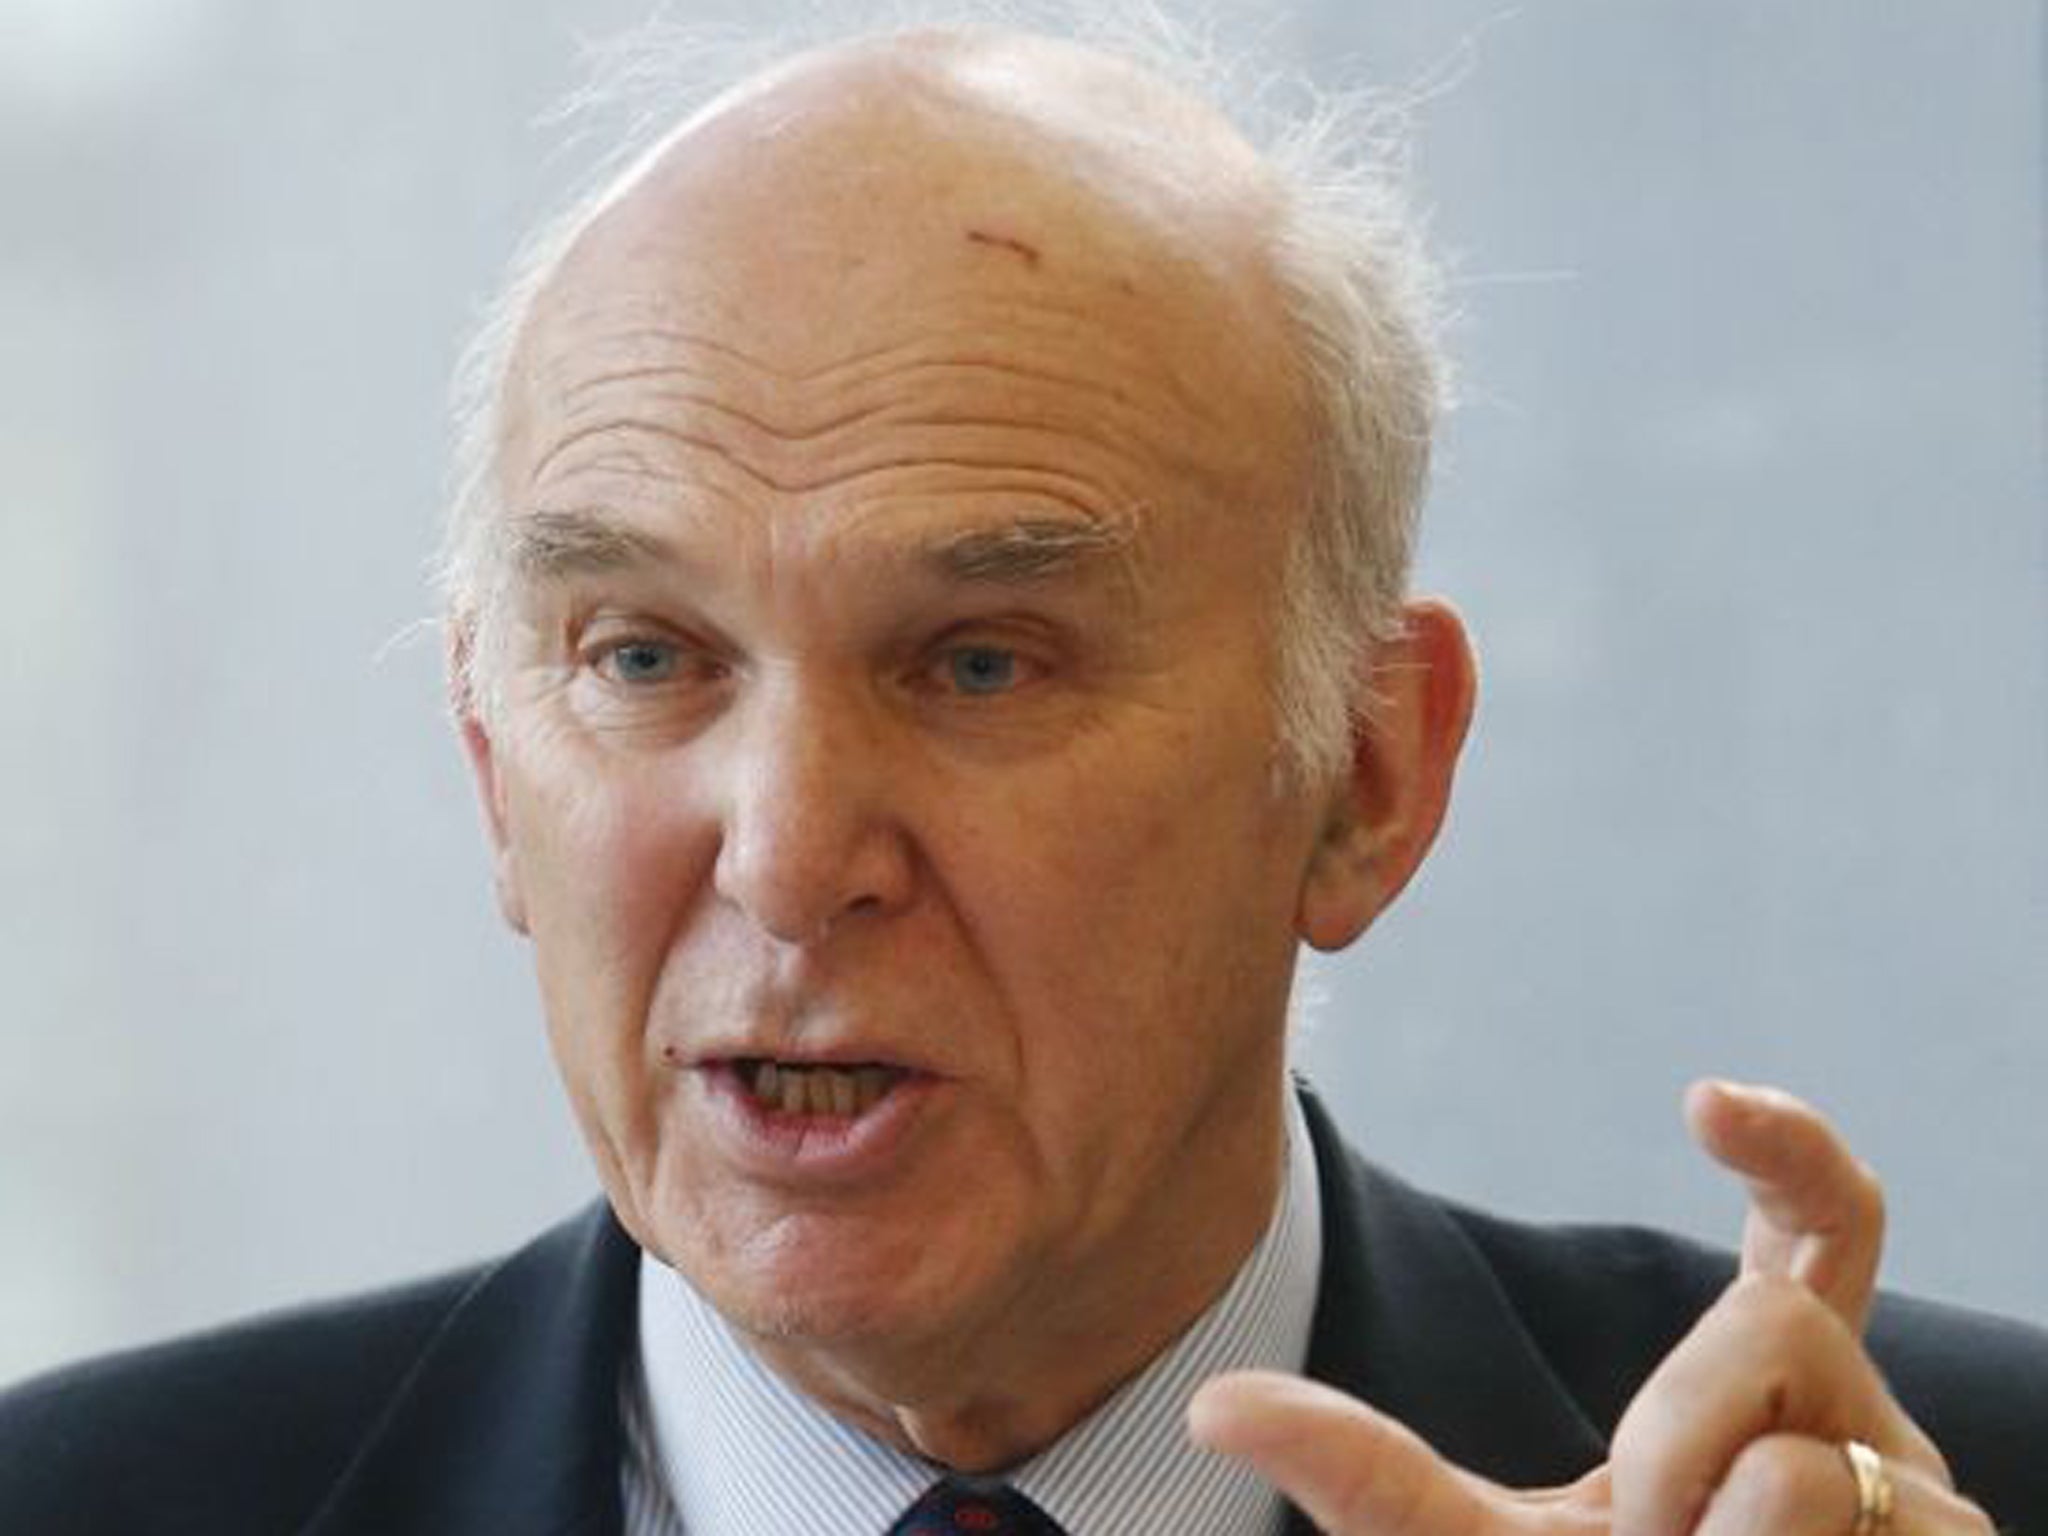 Vince Cable has called for 'restraint' for university vice-chancellors' and senior management's soaring pay packets